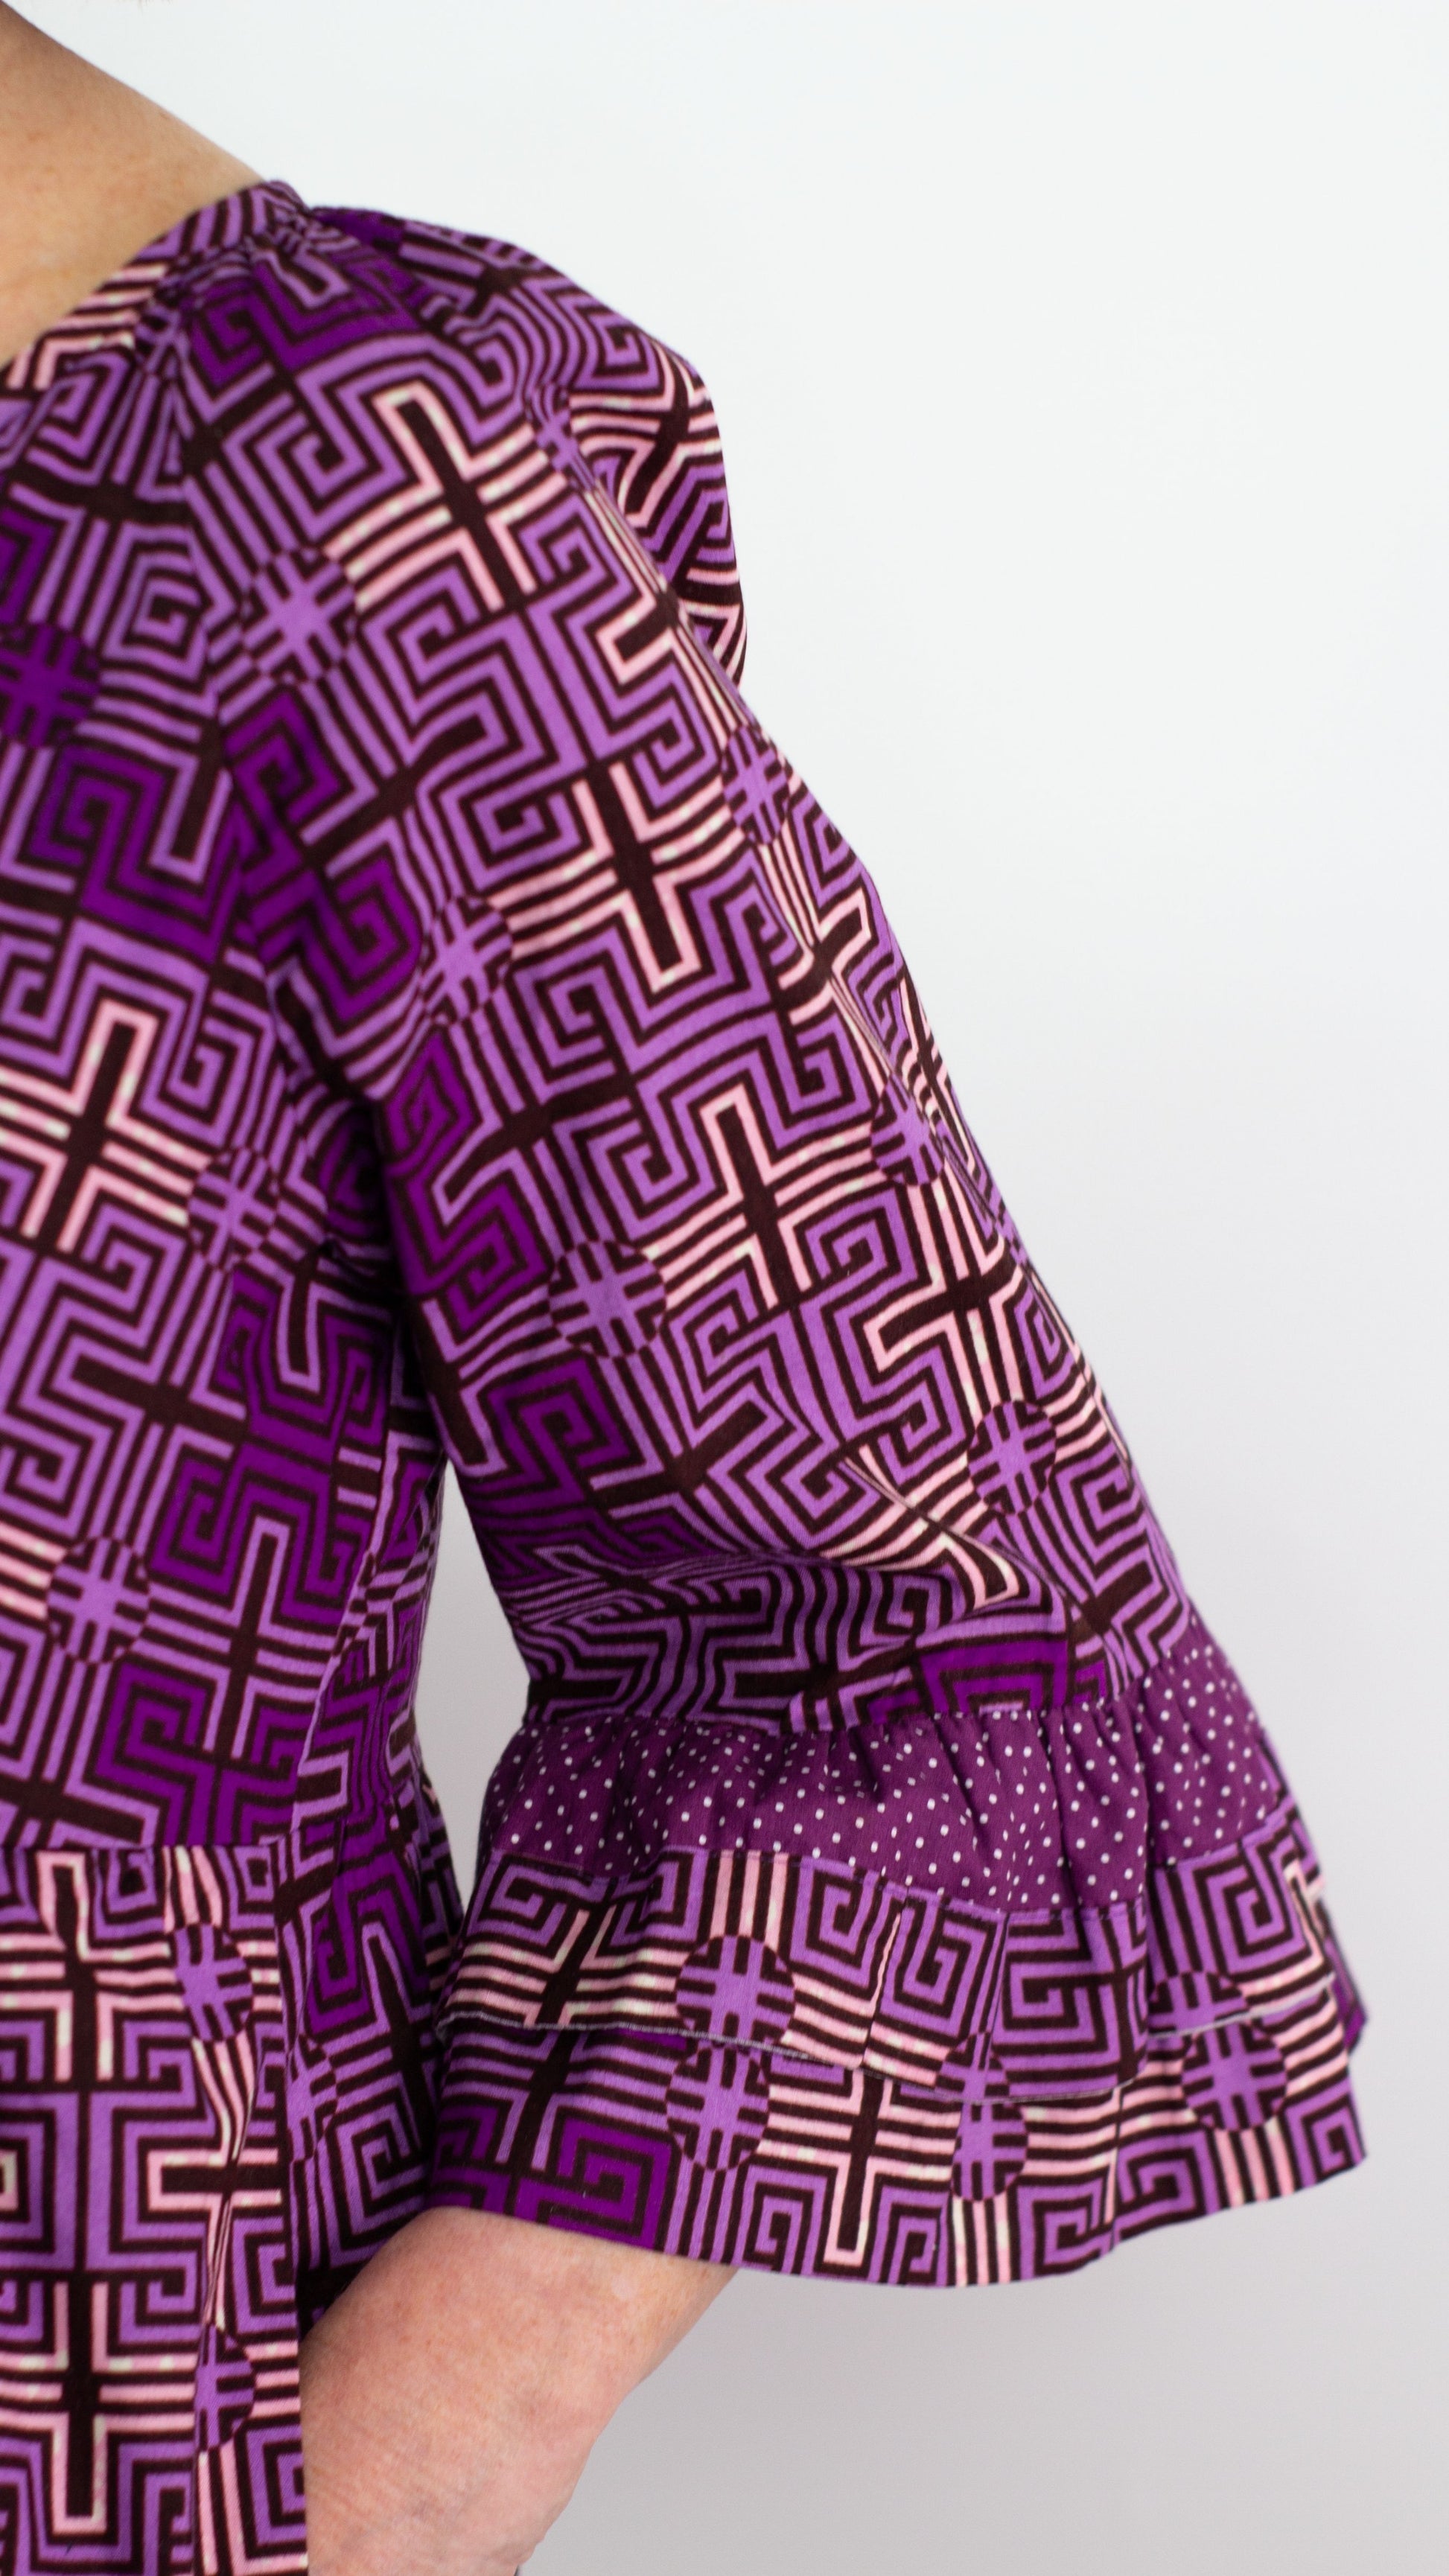 a close up view of the medium length purple ruffle sleeve, highlighting the playful designs of the print.